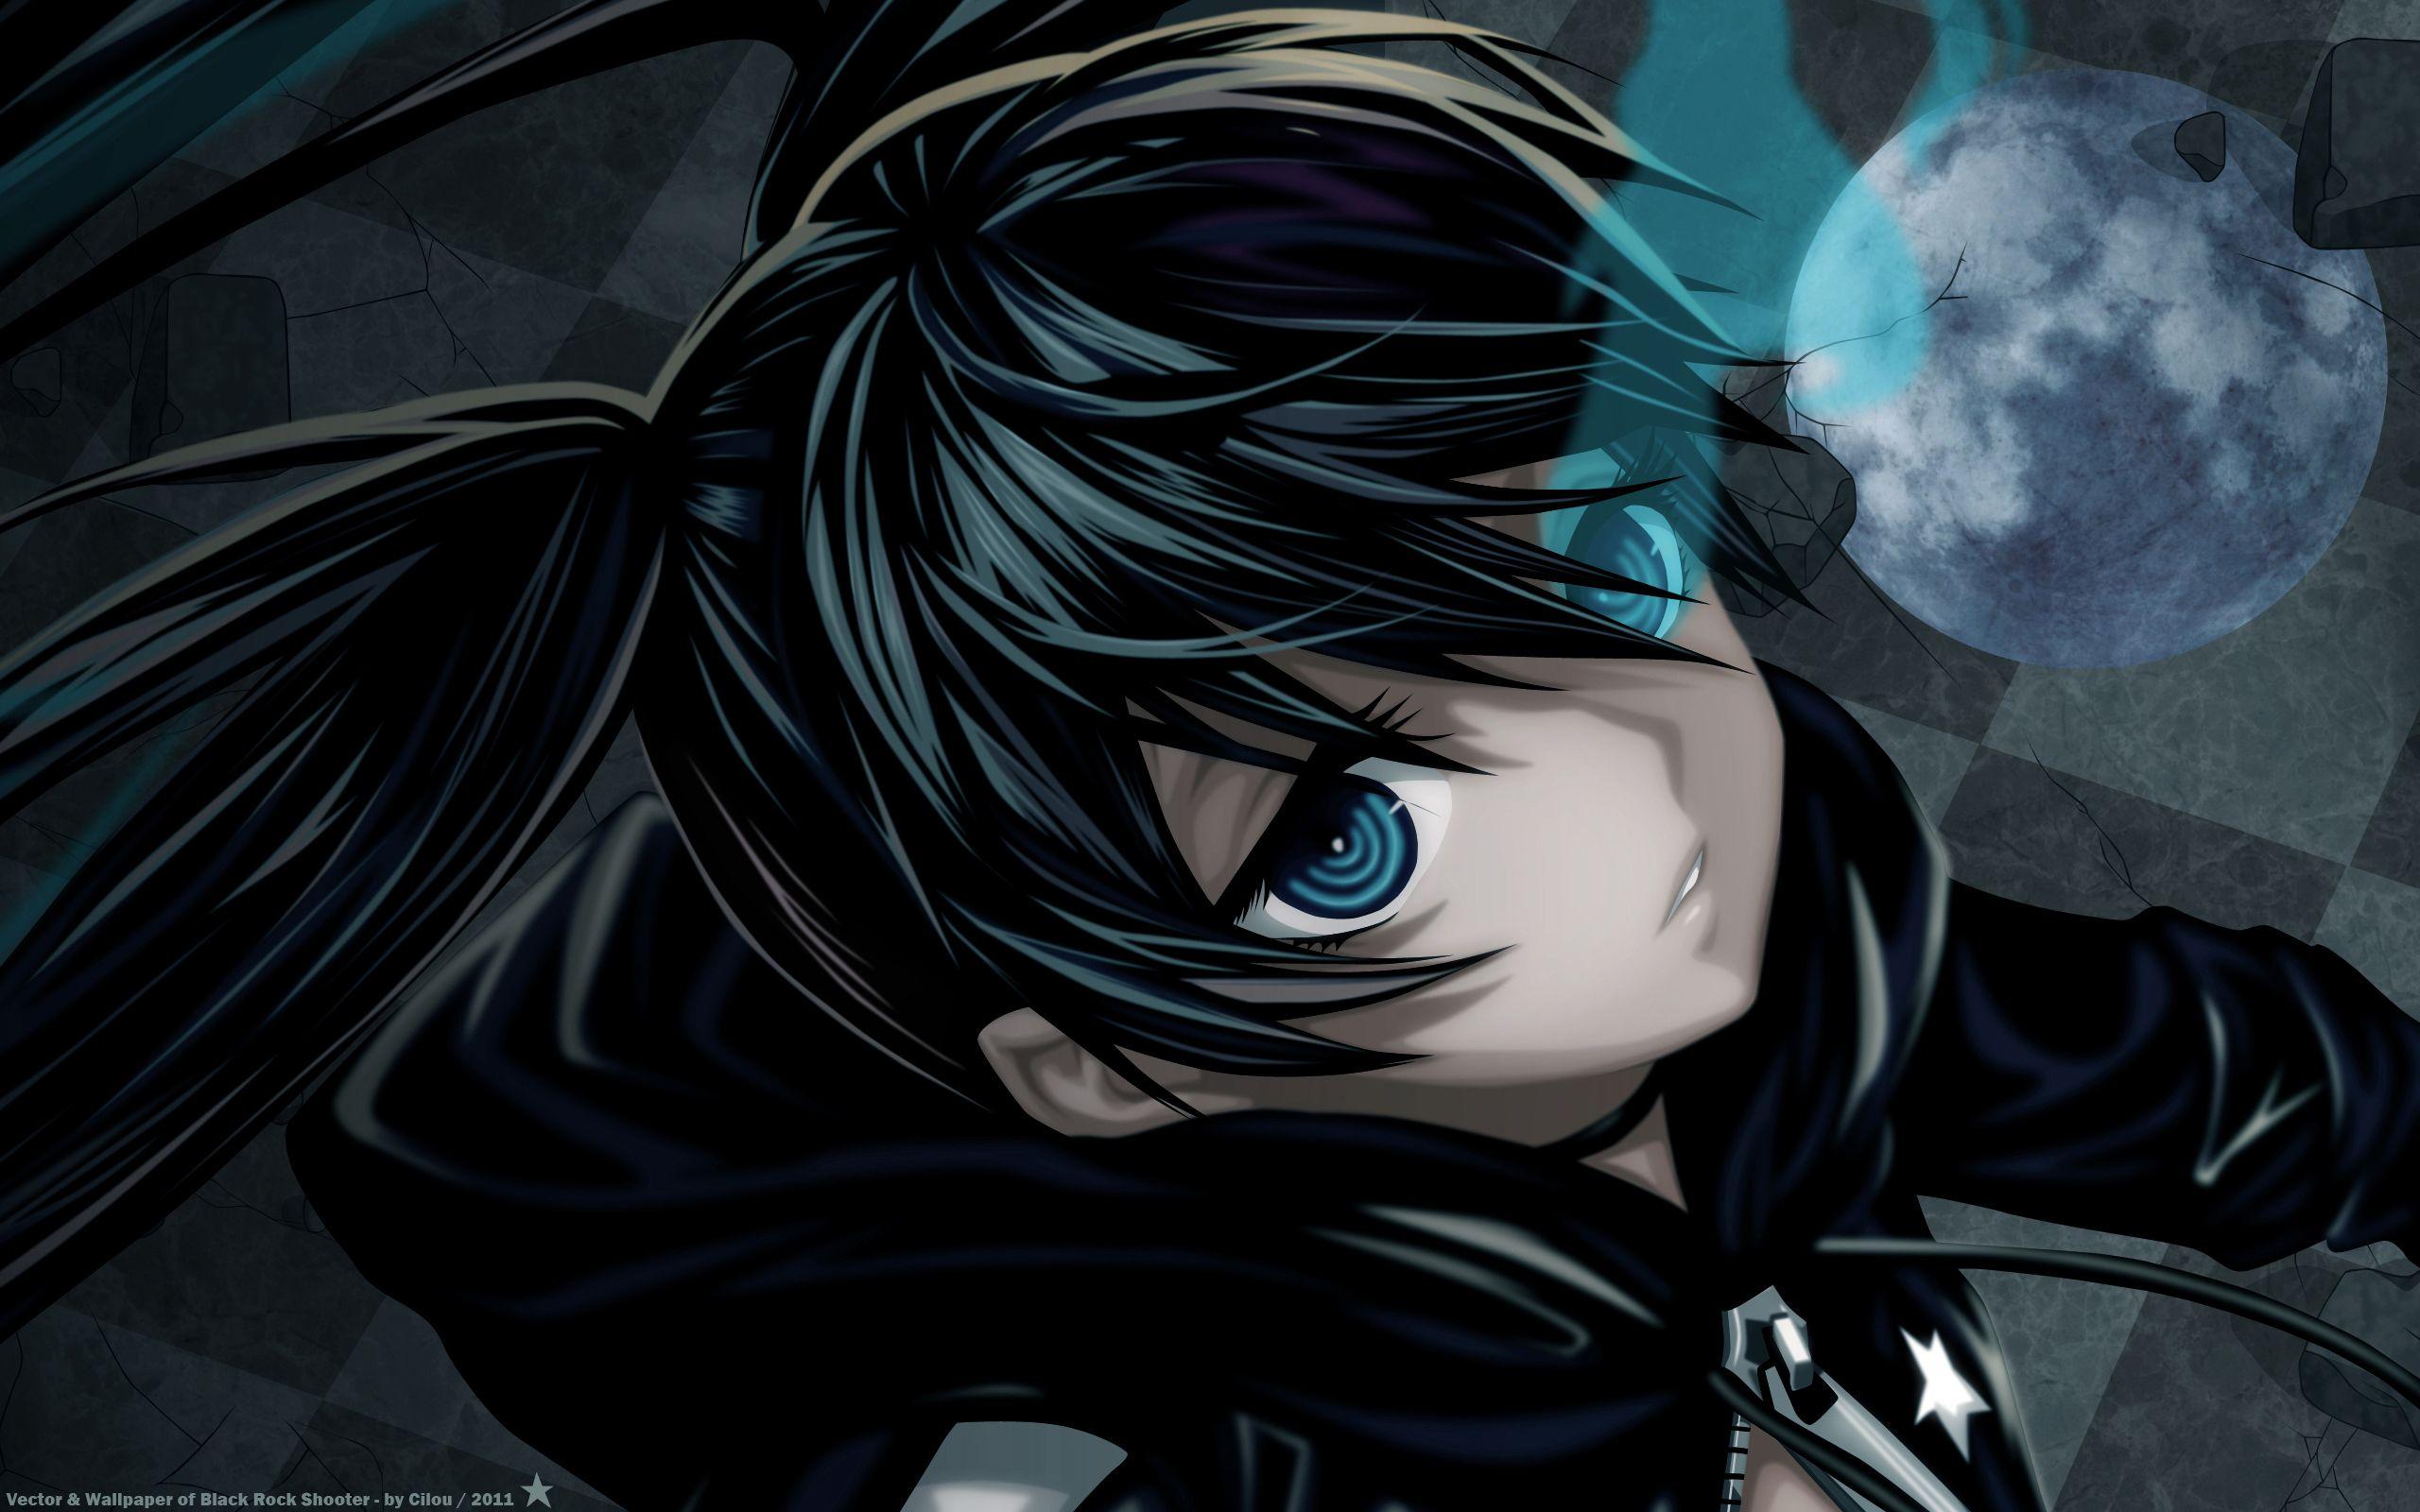 Black Rock Shooter and Scan Gallery